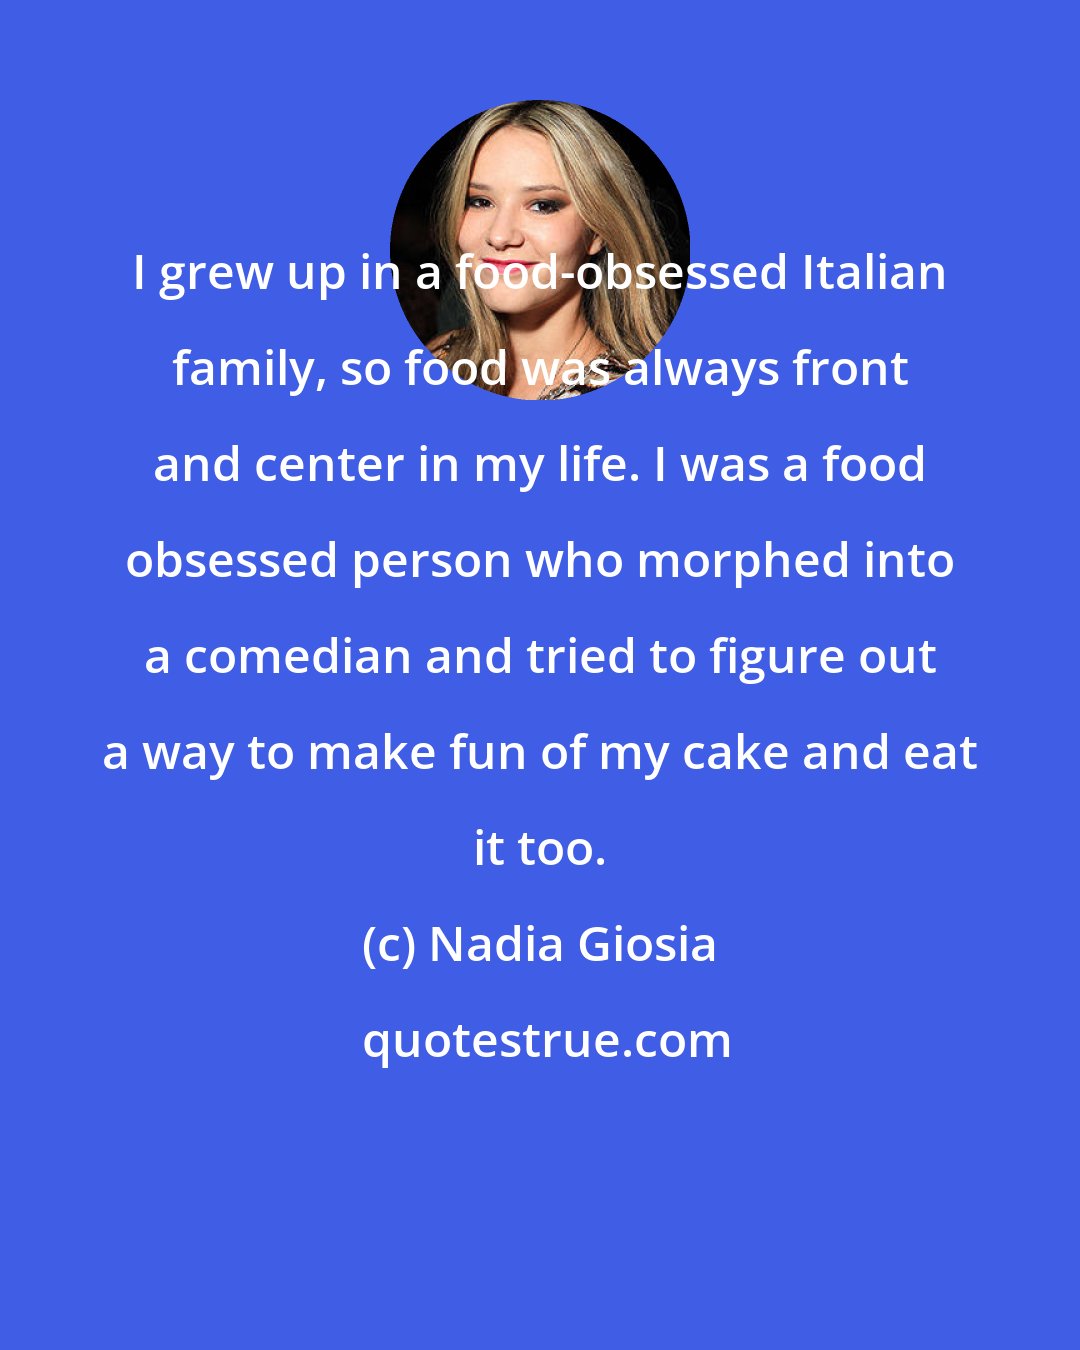 Nadia Giosia: I grew up in a food-obsessed Italian family, so food was always front and center in my life. I was a food obsessed person who morphed into a comedian and tried to figure out a way to make fun of my cake and eat it too.